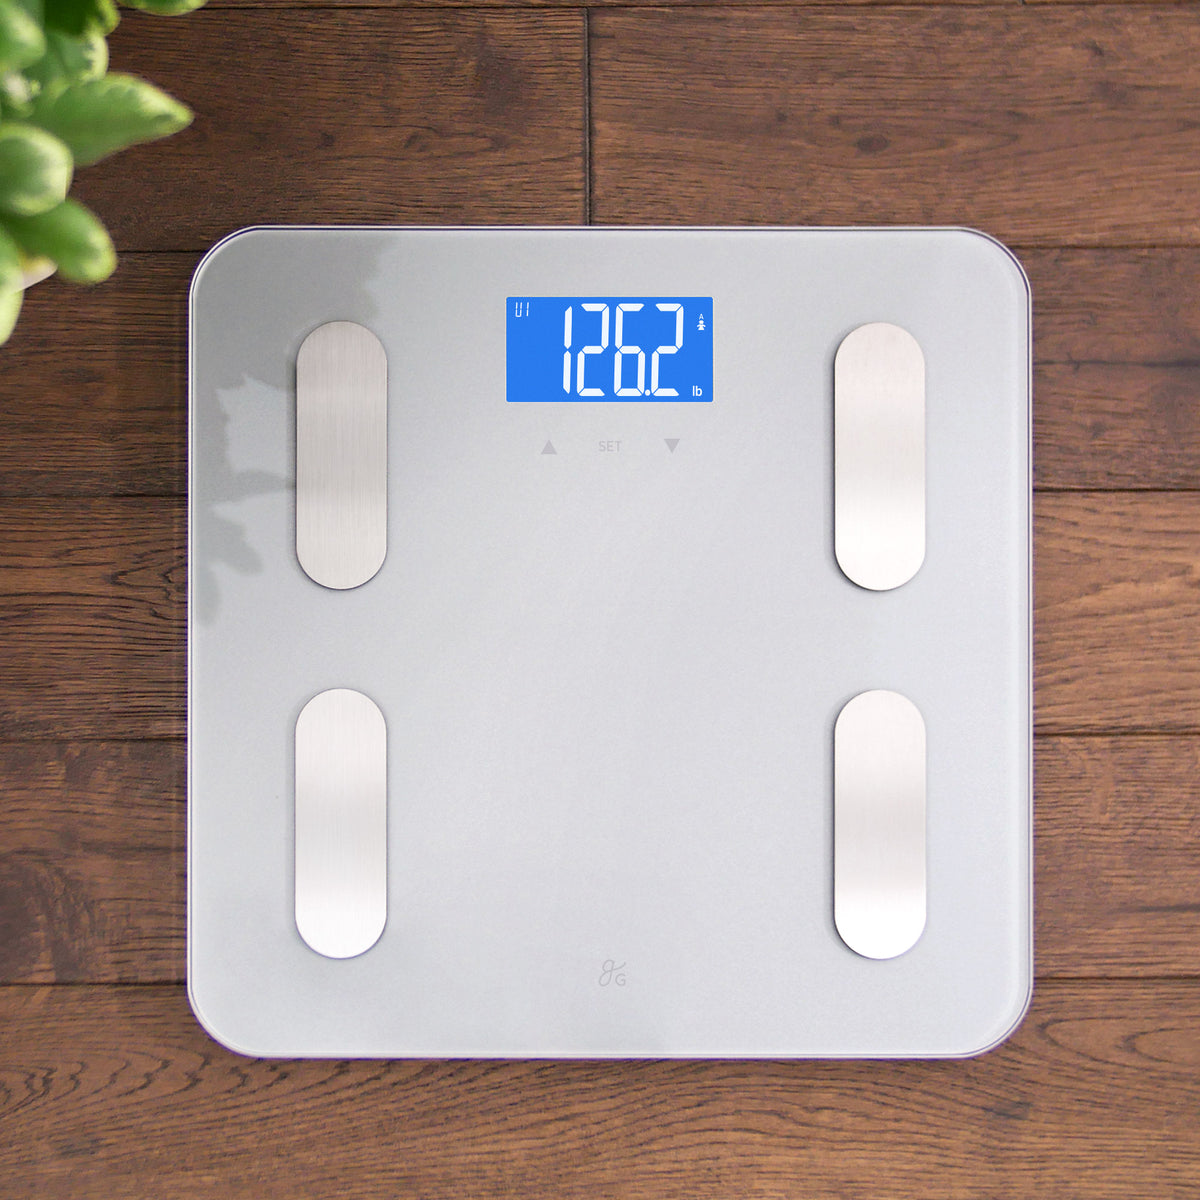 Body Composition Scale - Greater Goods